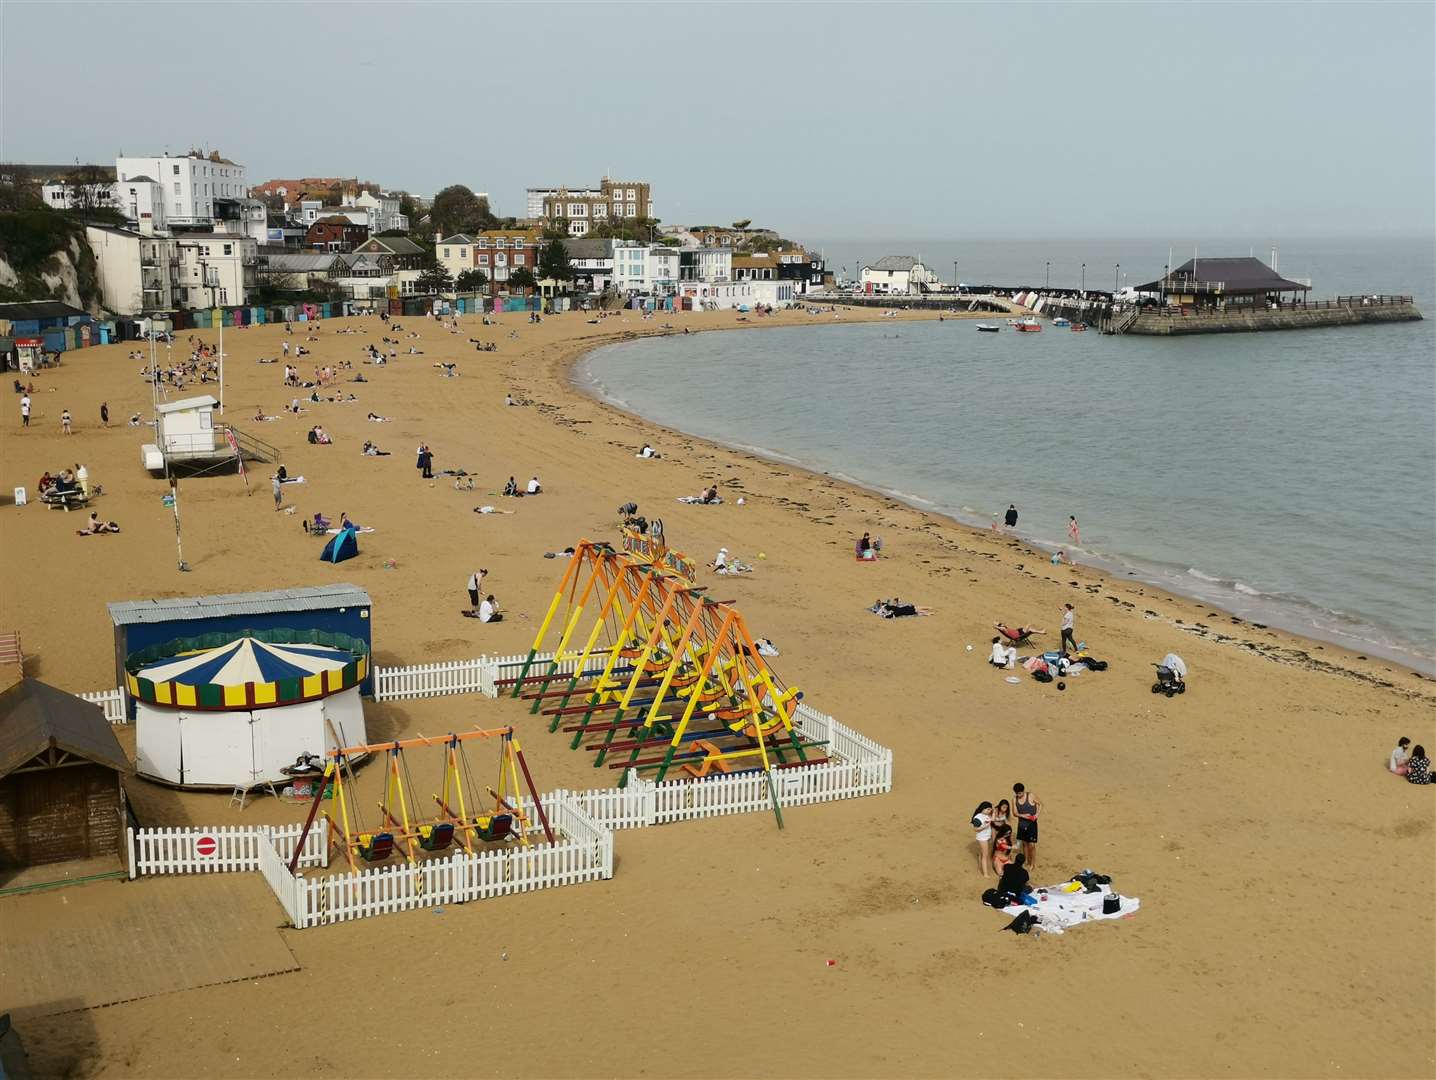 Viking Bay in Broadstairs March, 2021